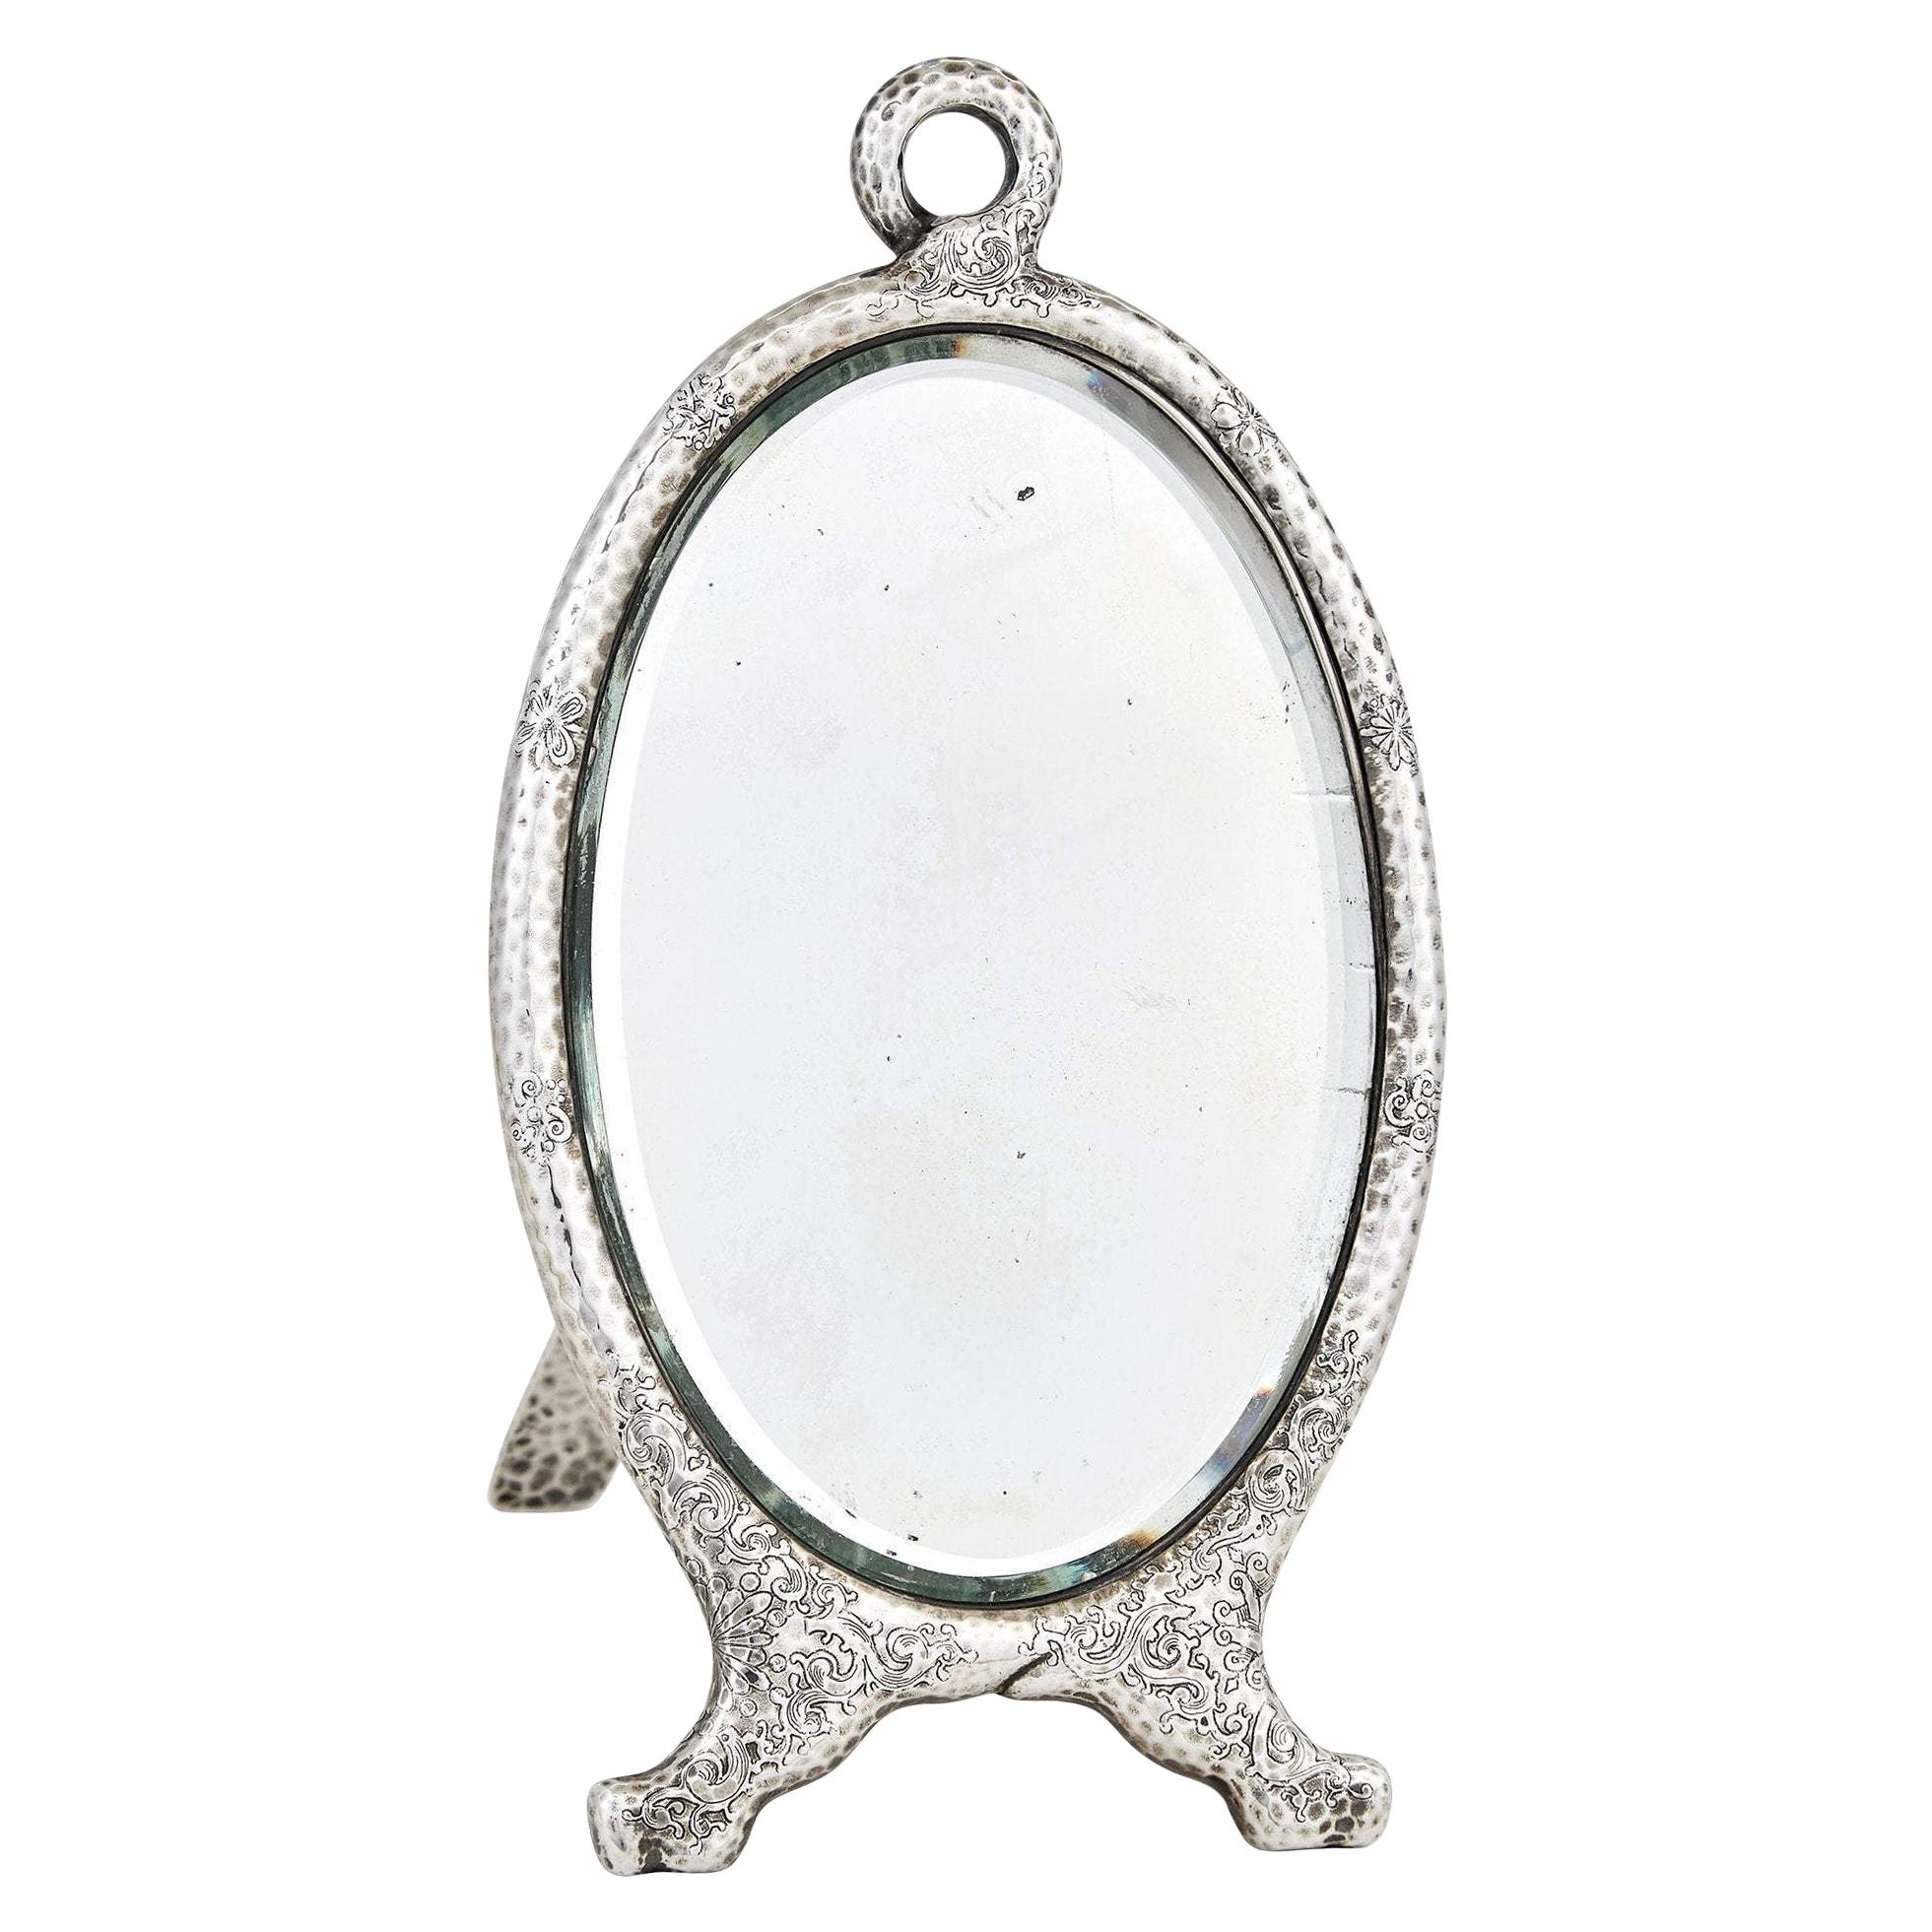 Tiffany & Co. 1881 Sterling Silver Japonesque Easel Mirror